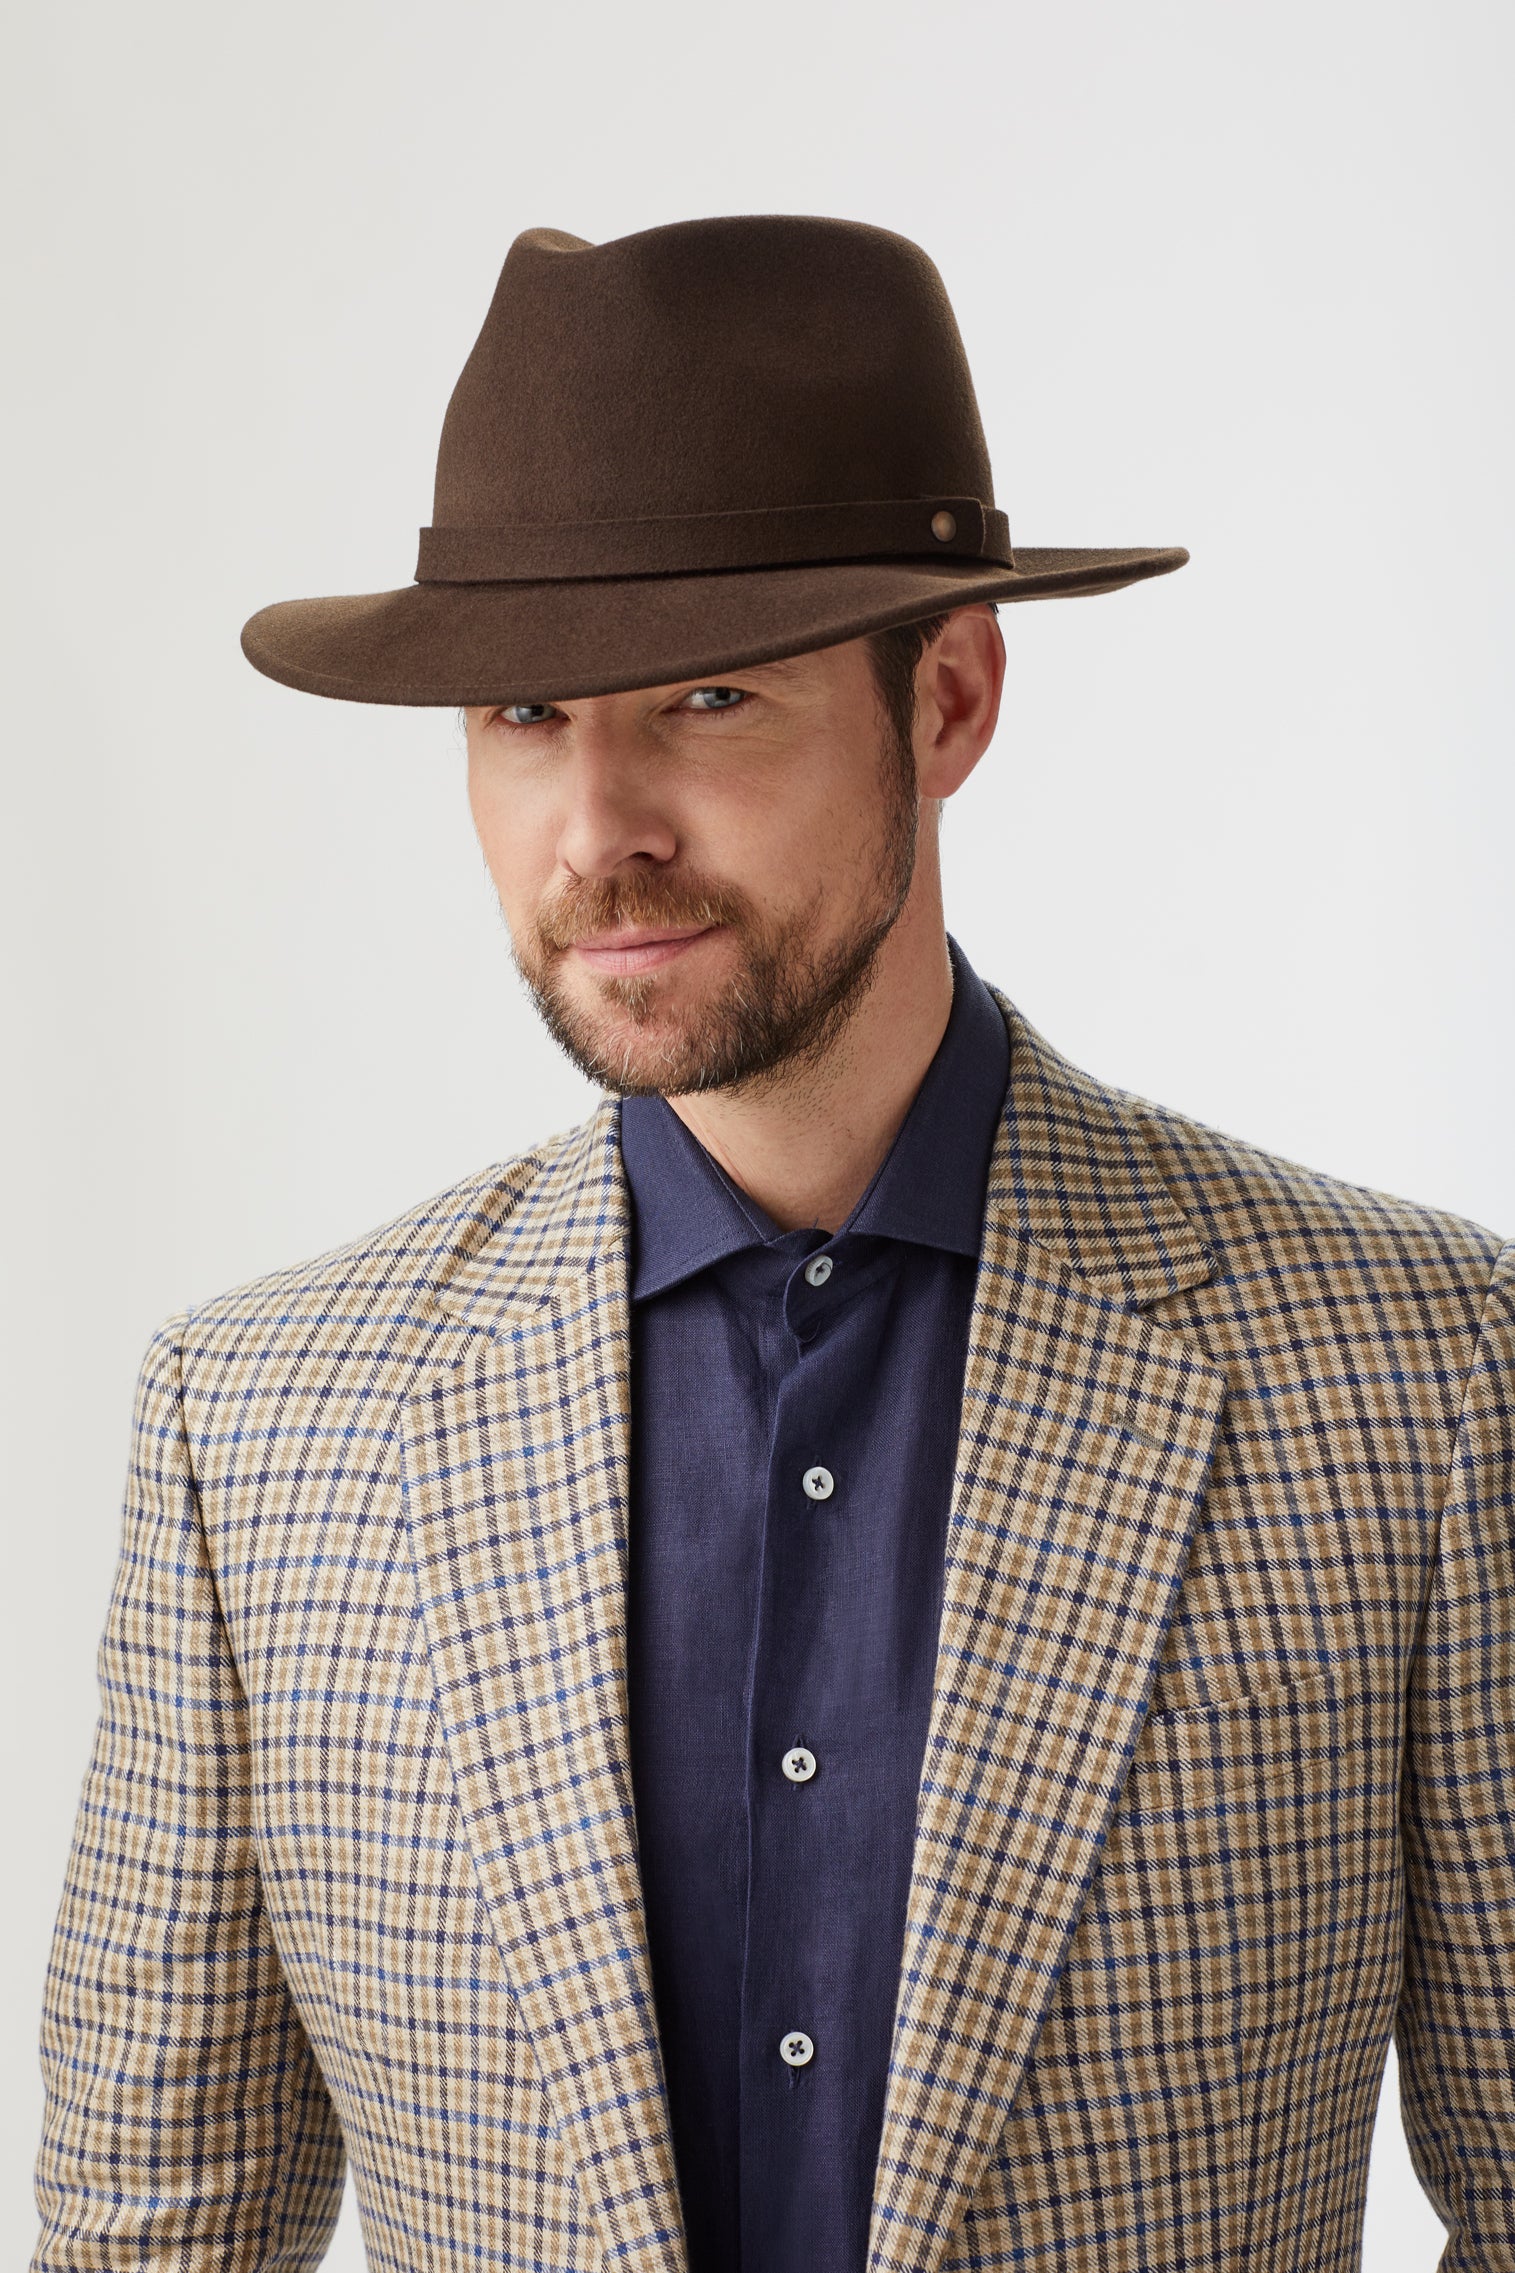 Nomad Rollable Trilby - All Ready to Wear - Lock & Co. Hatters London UK